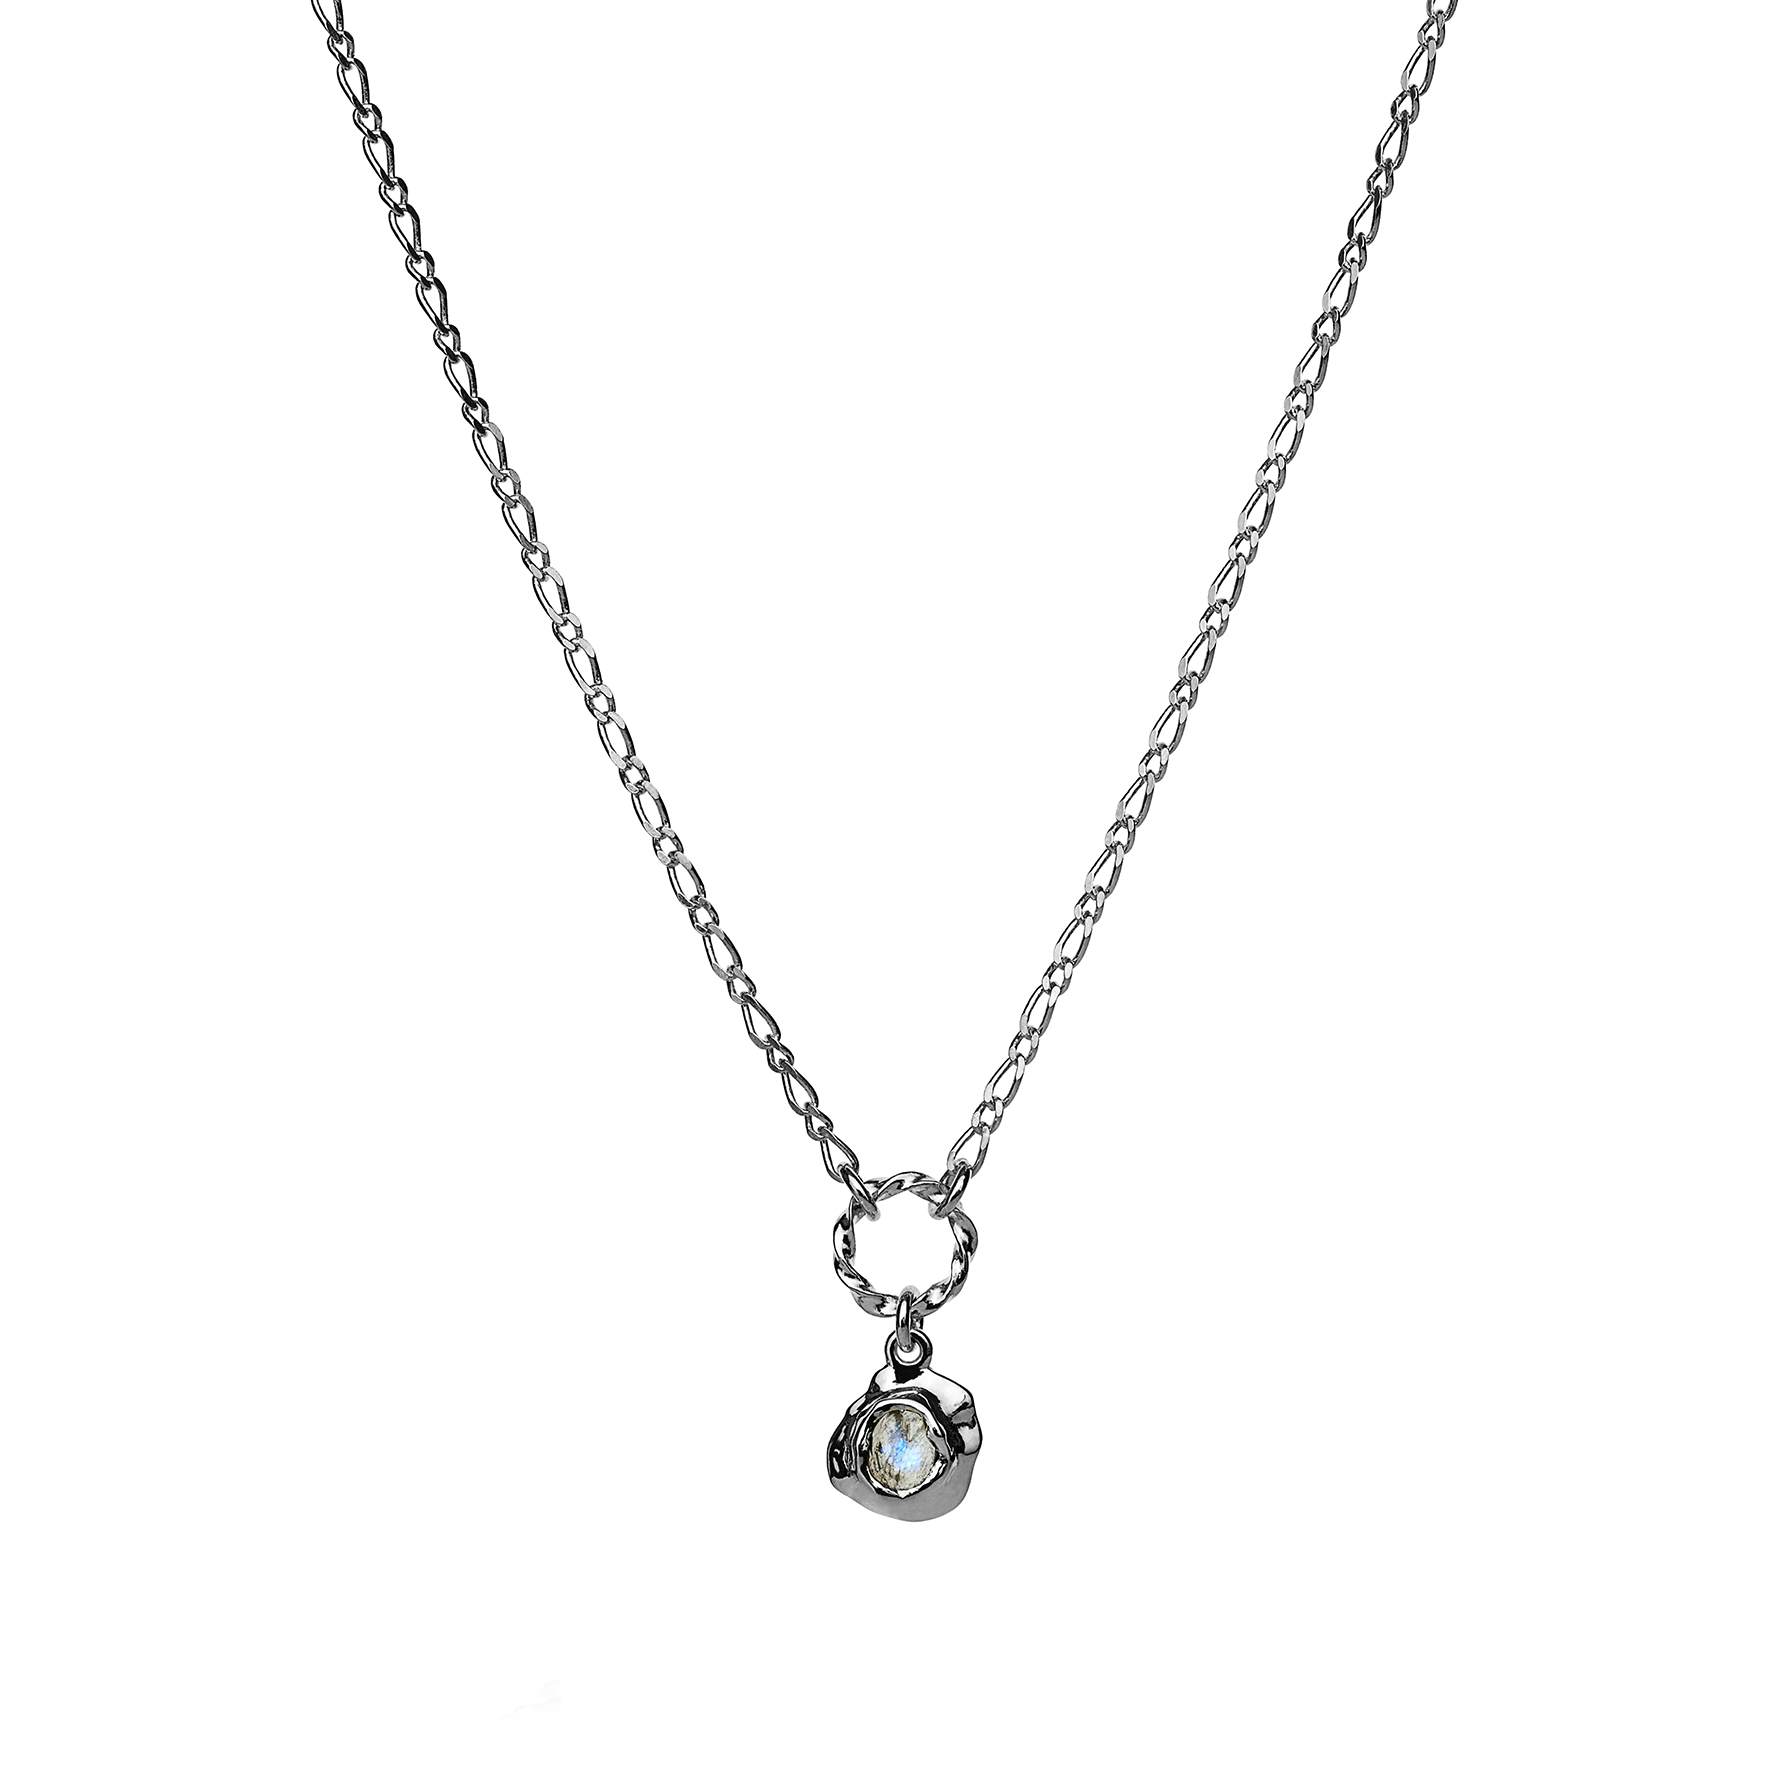 Dorith necklace from Maanesten in Silver Sterling 925